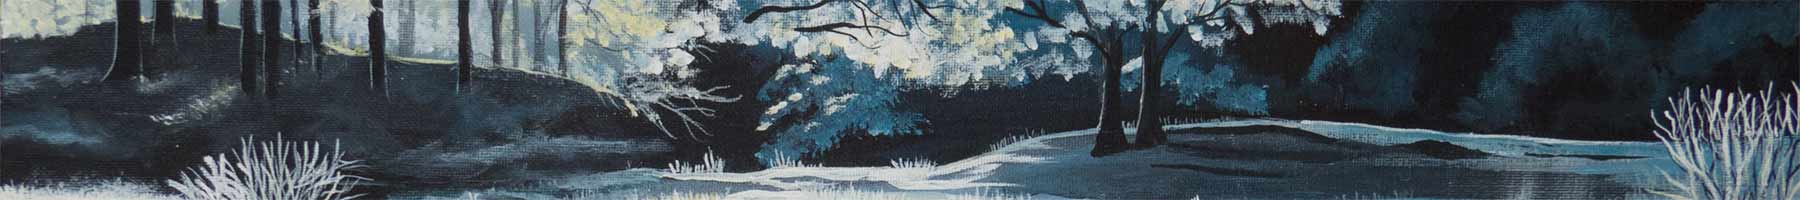 painting of snowy trees